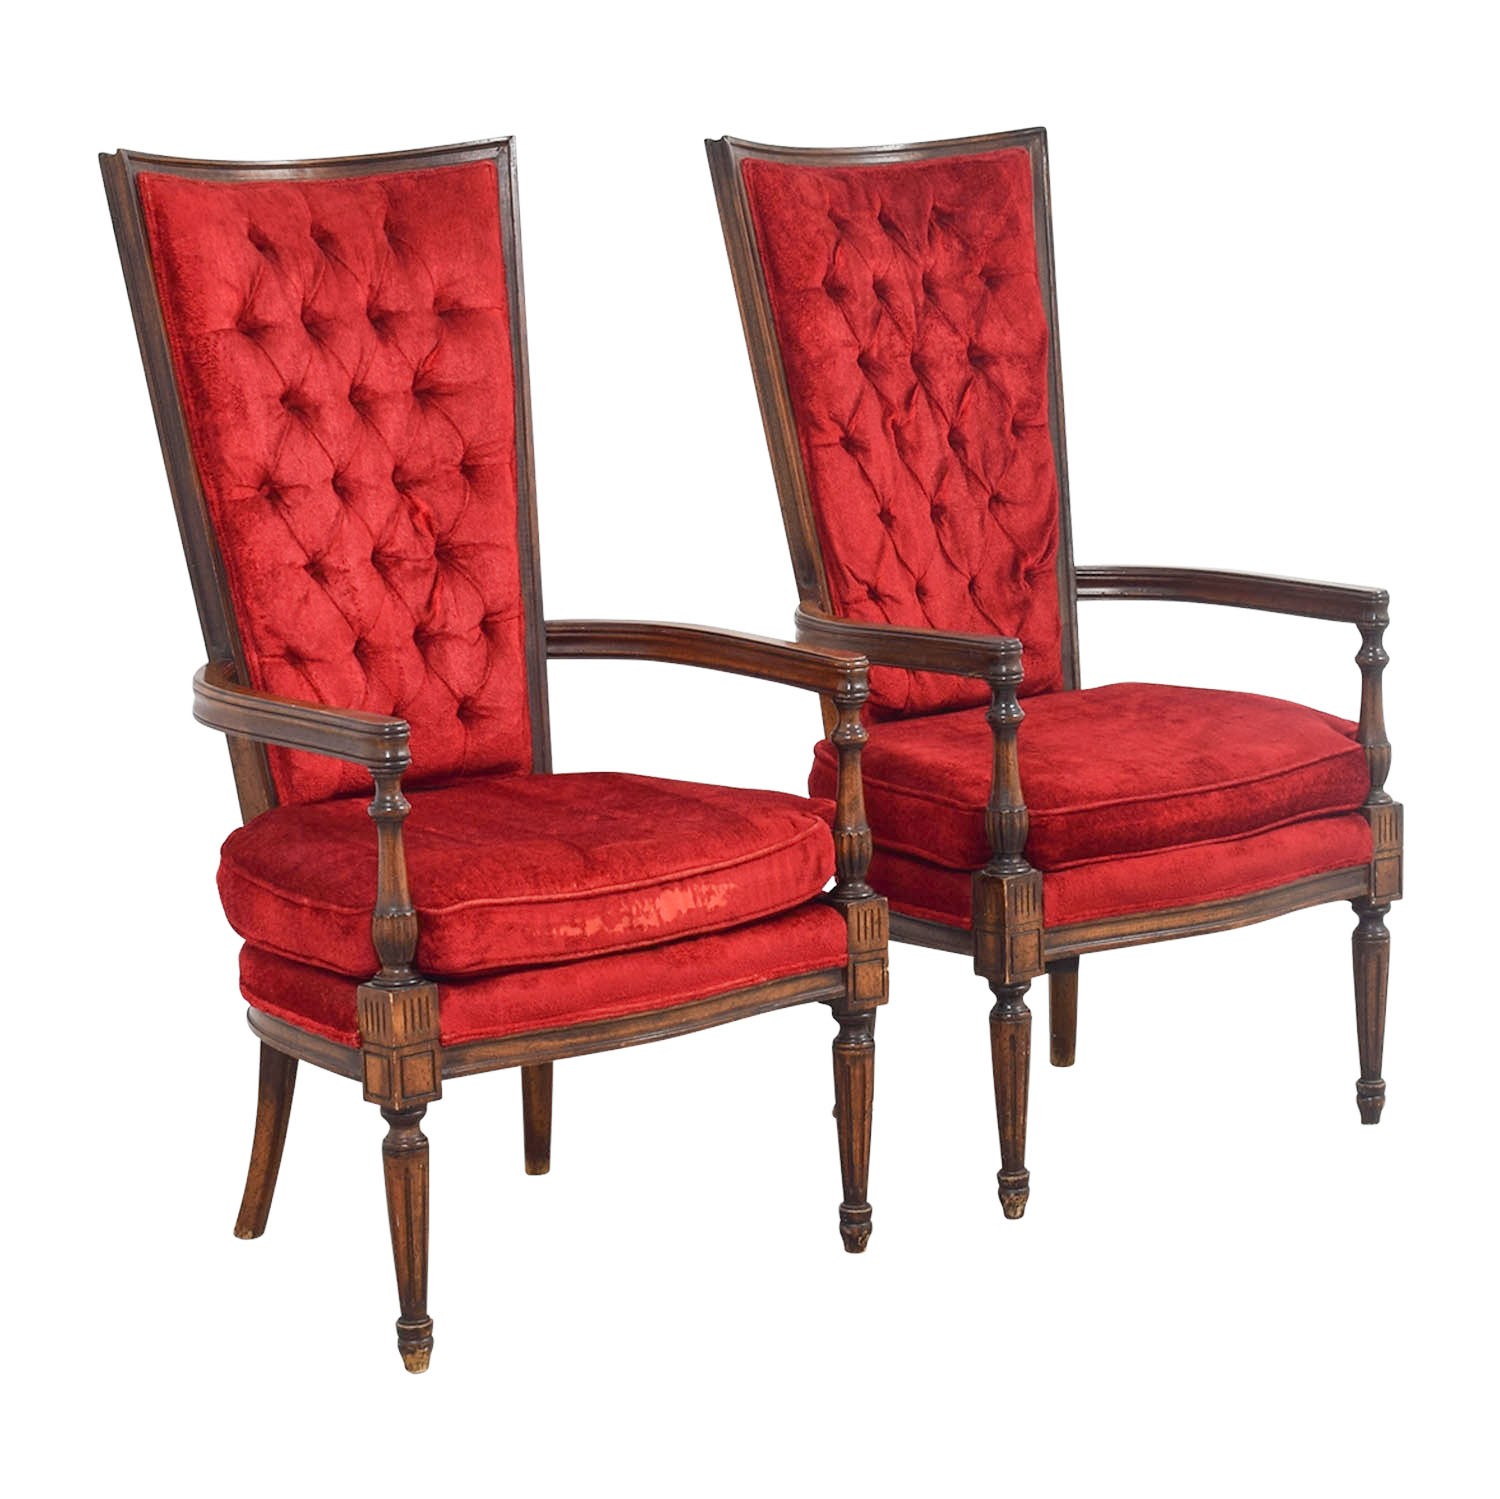 79 off vintage red tufted high back accent chairs chairs